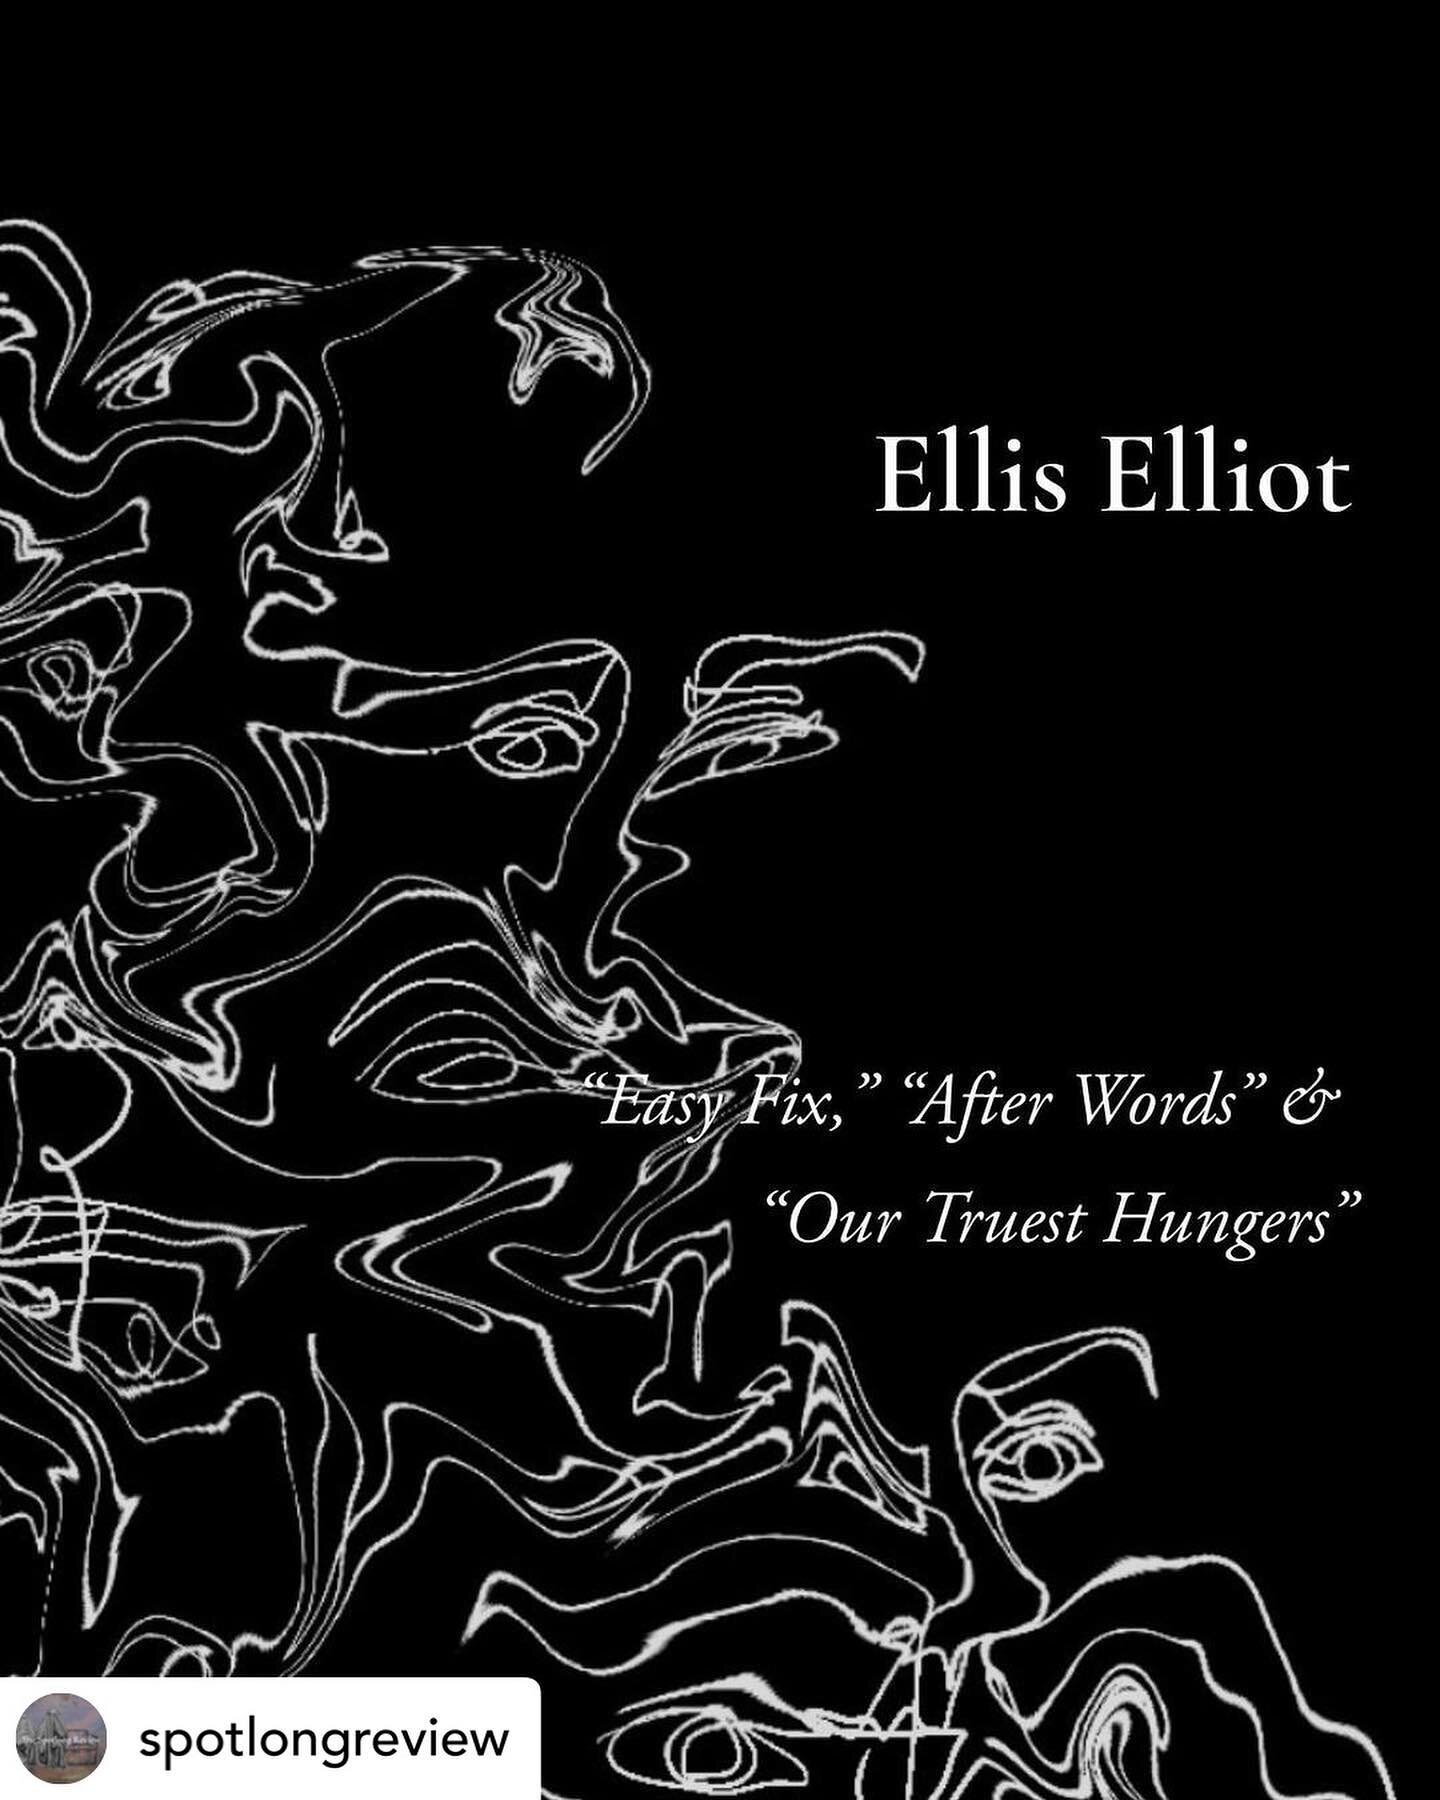 Thank you, #spotlongreview !
You can drop the final t in Elliott anytime you want. Check out this wonderful new lit journal.
#spotlongreview #poetry #specialneeds #lifewithspecialneeds #motherhood #motherslove #poetrycommunity #poetsociety #poetsofin